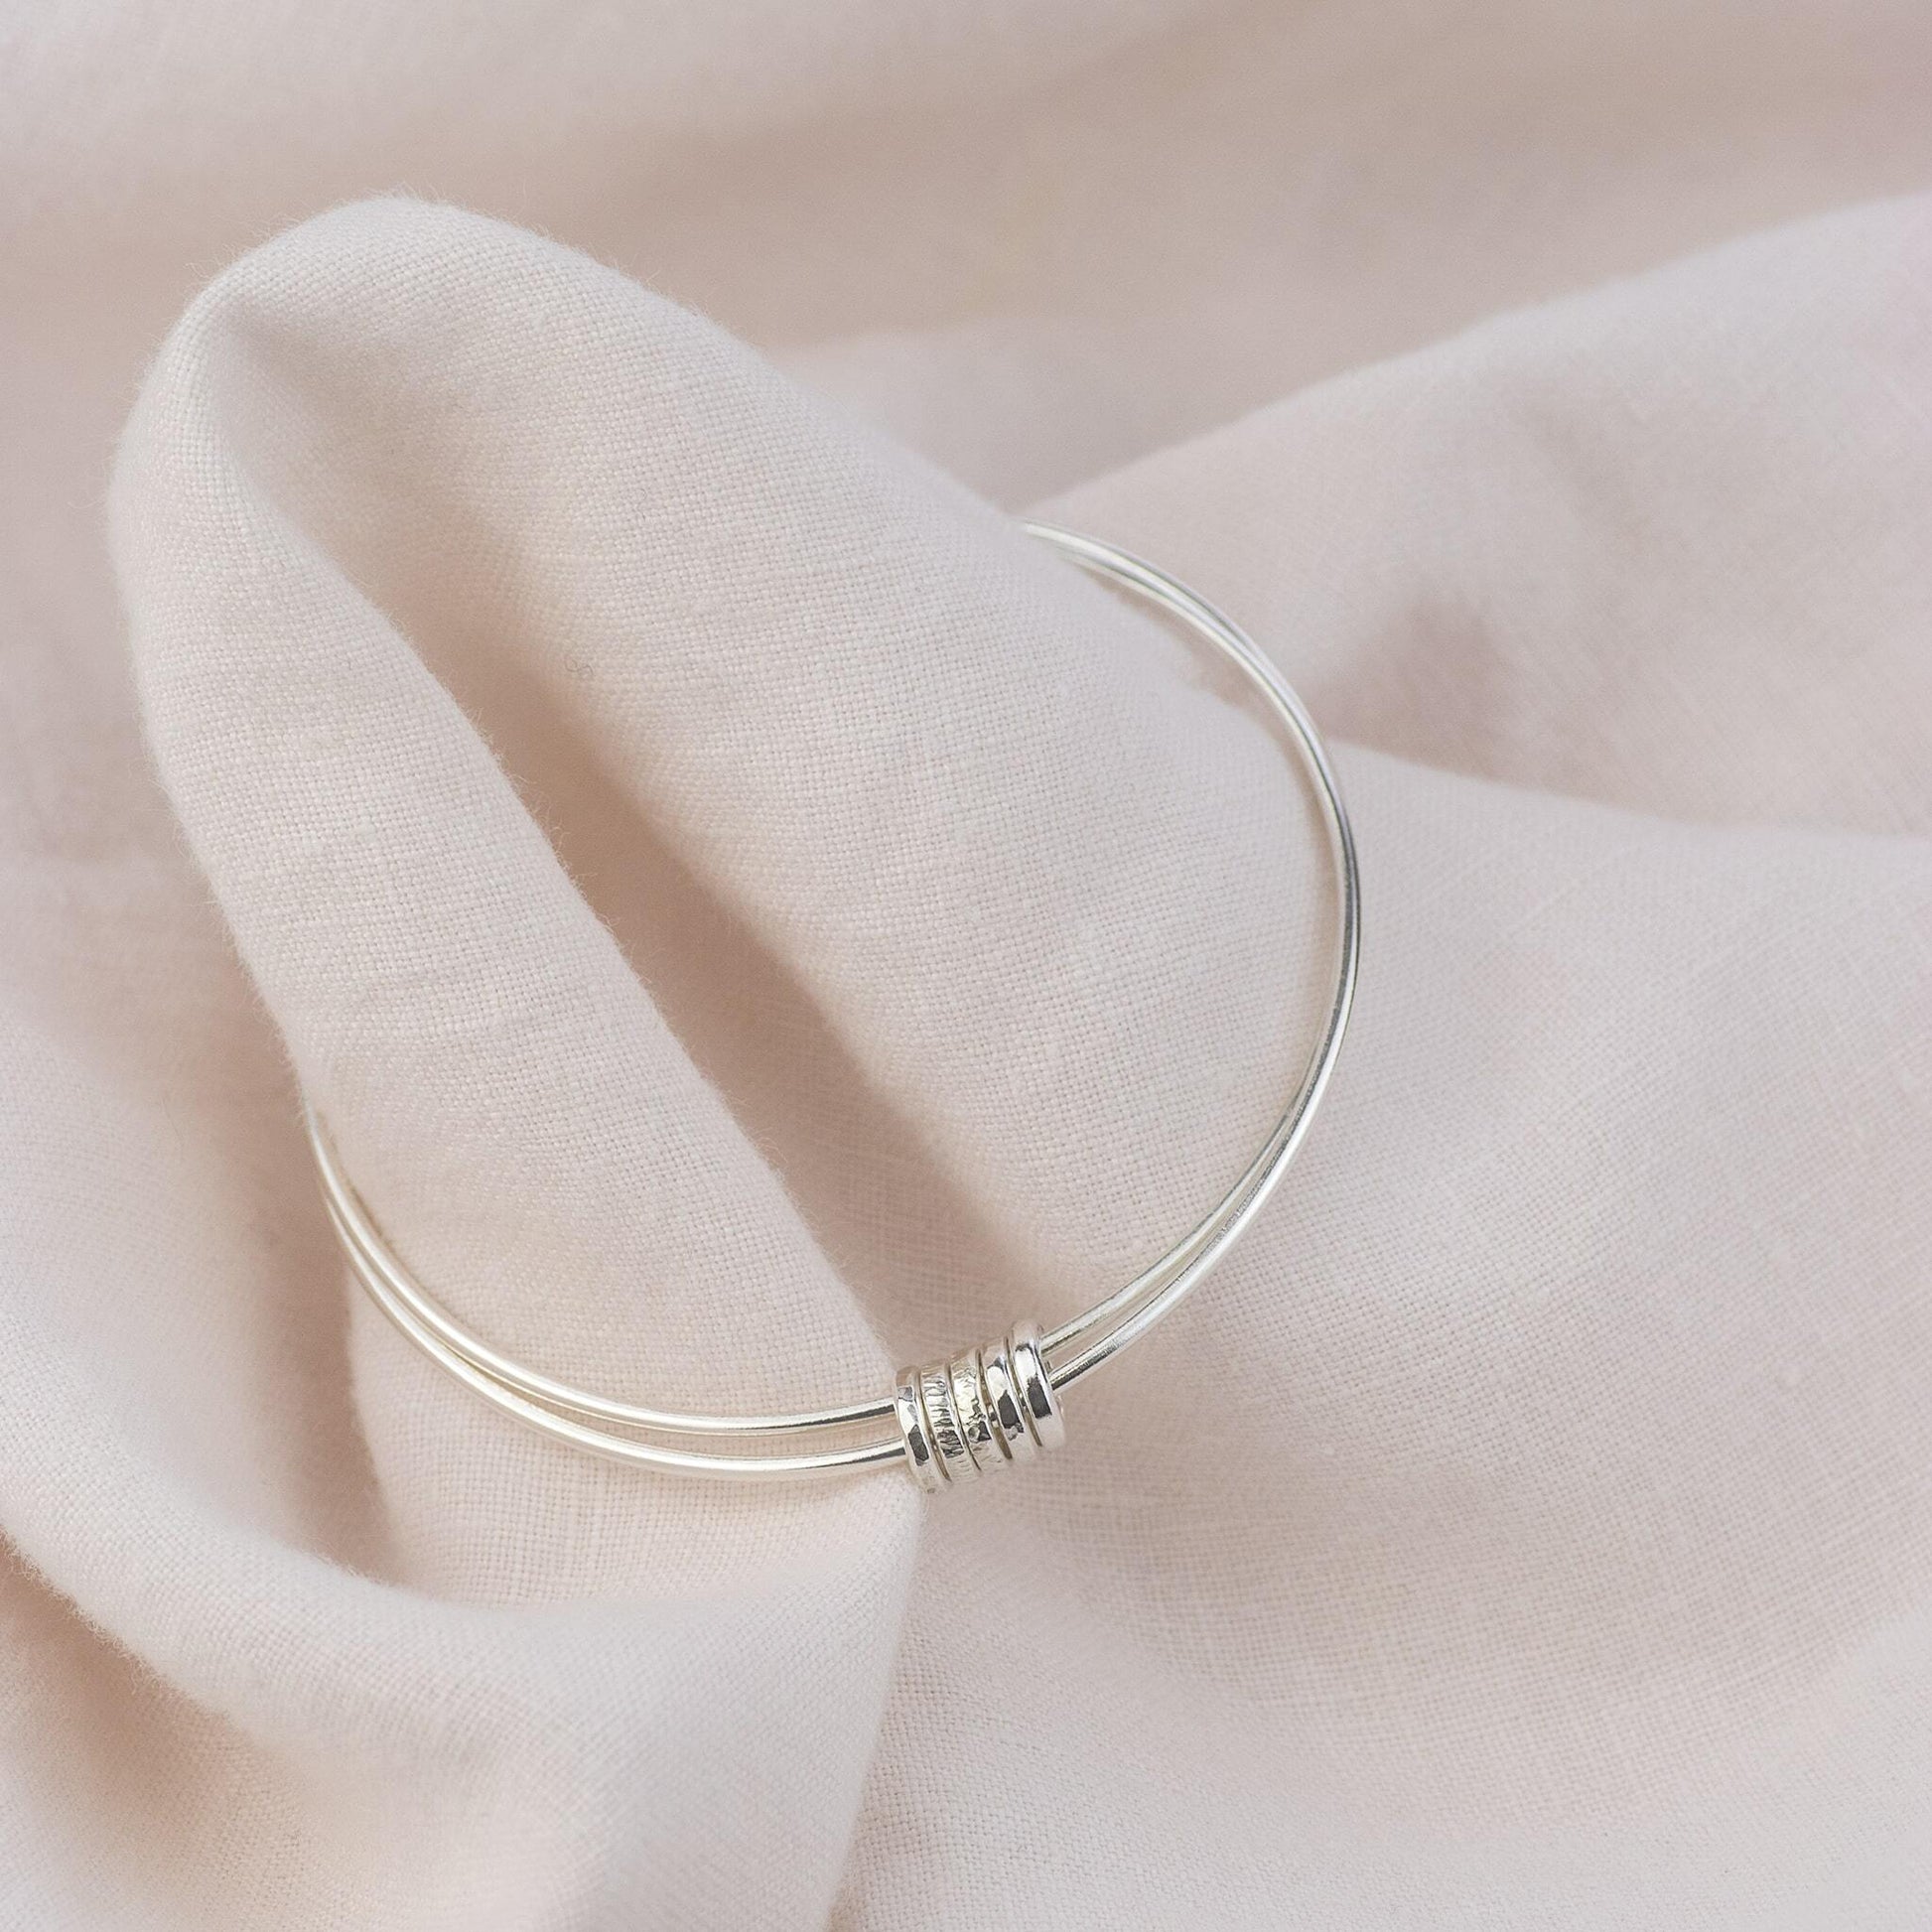 25th Anniversary Gift - Silver Wedding Anniversary - Double Linked Bangle